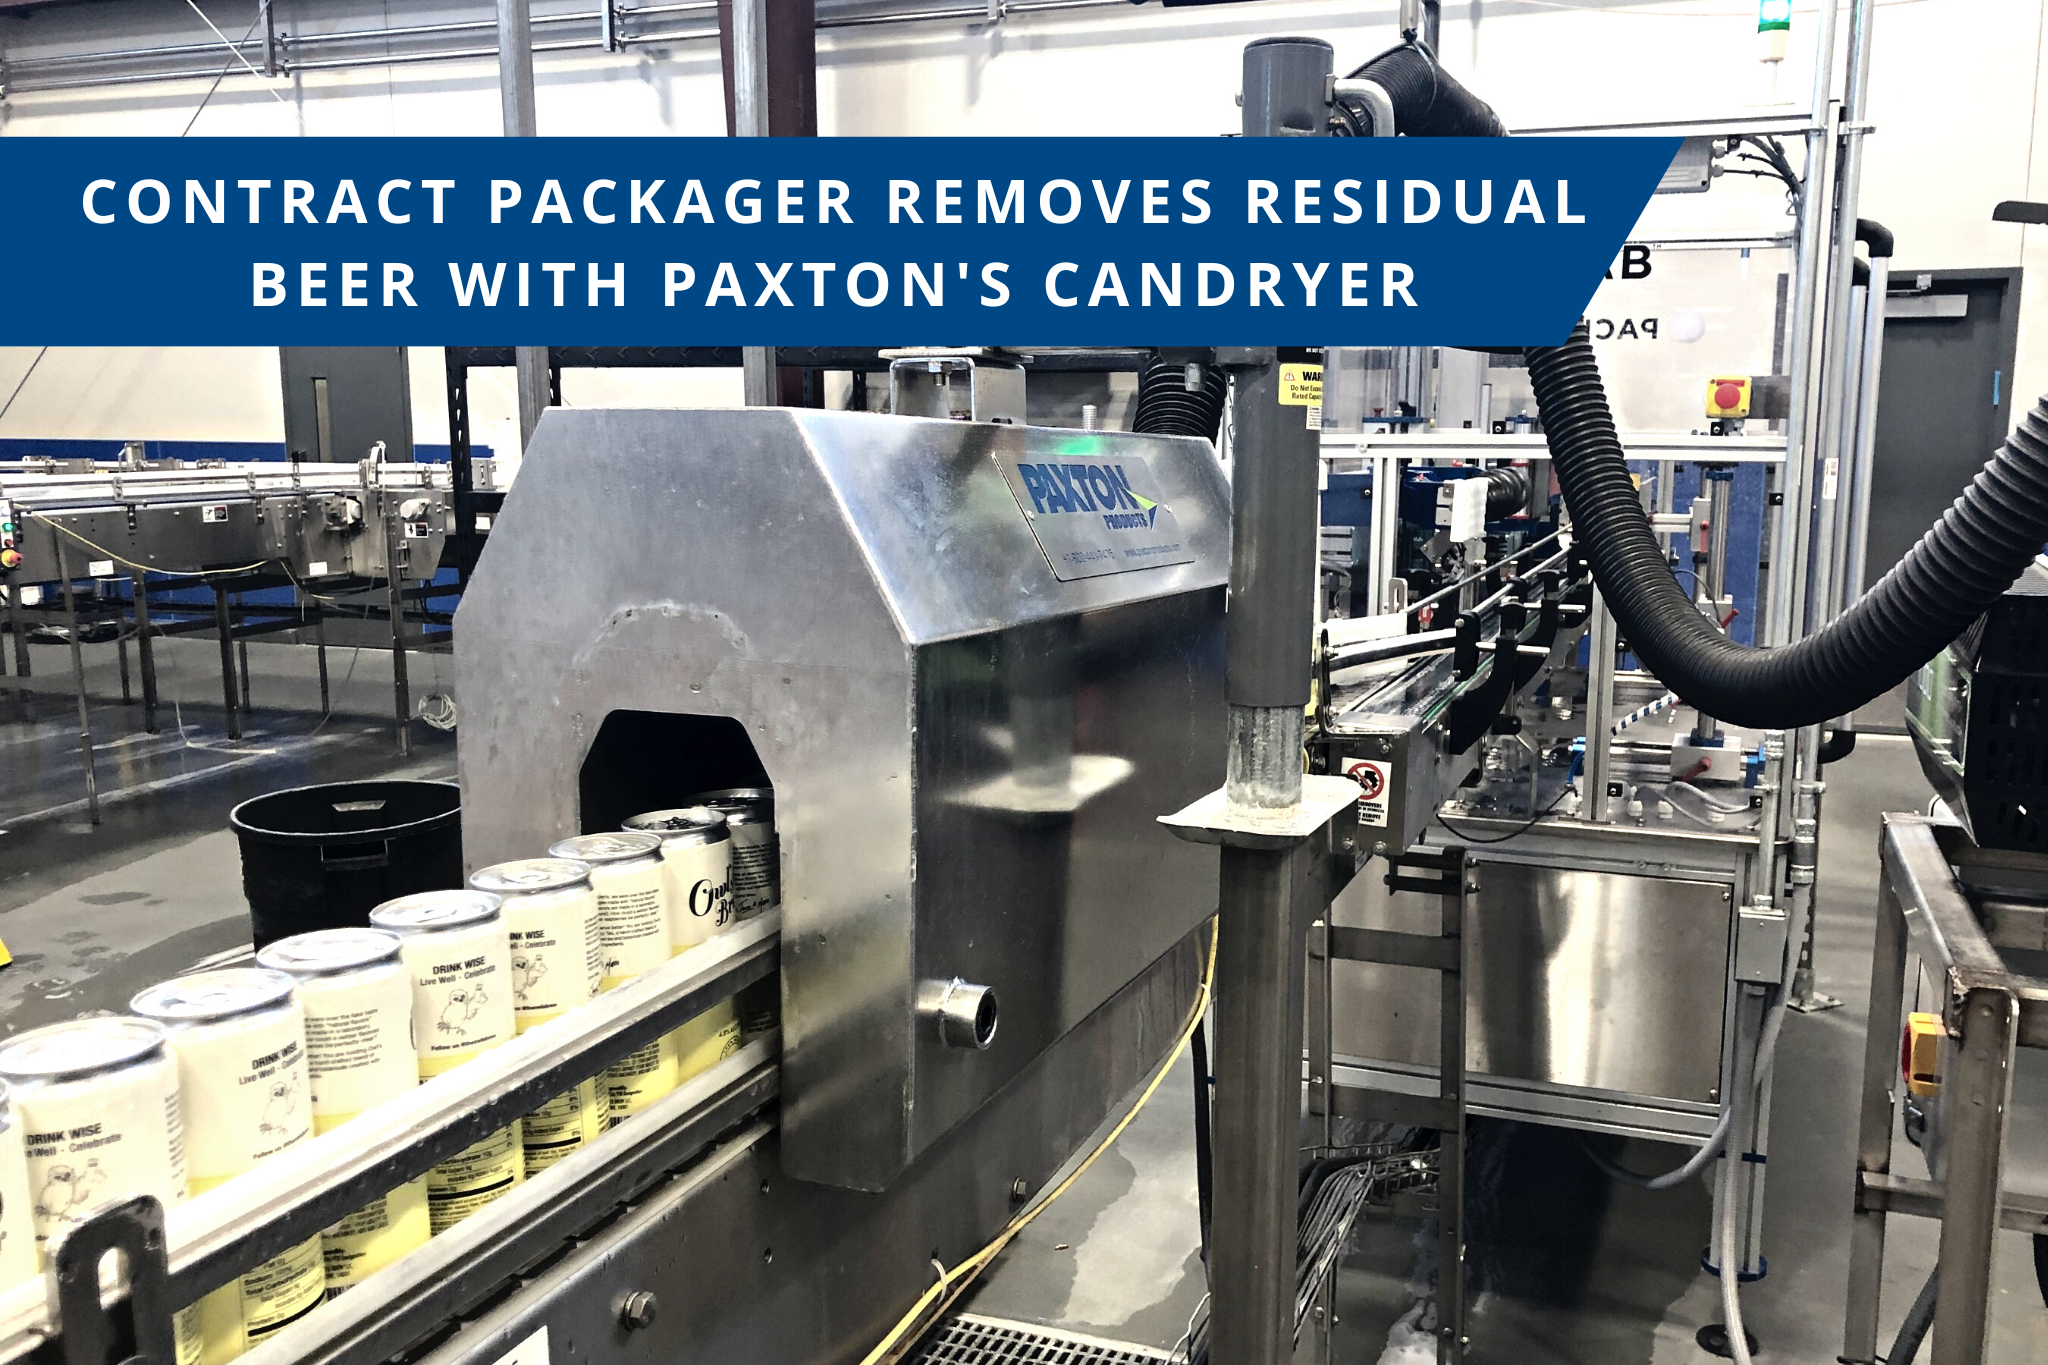 Paxton's custom-designed air solution blows off grease-infused debris from baking pans